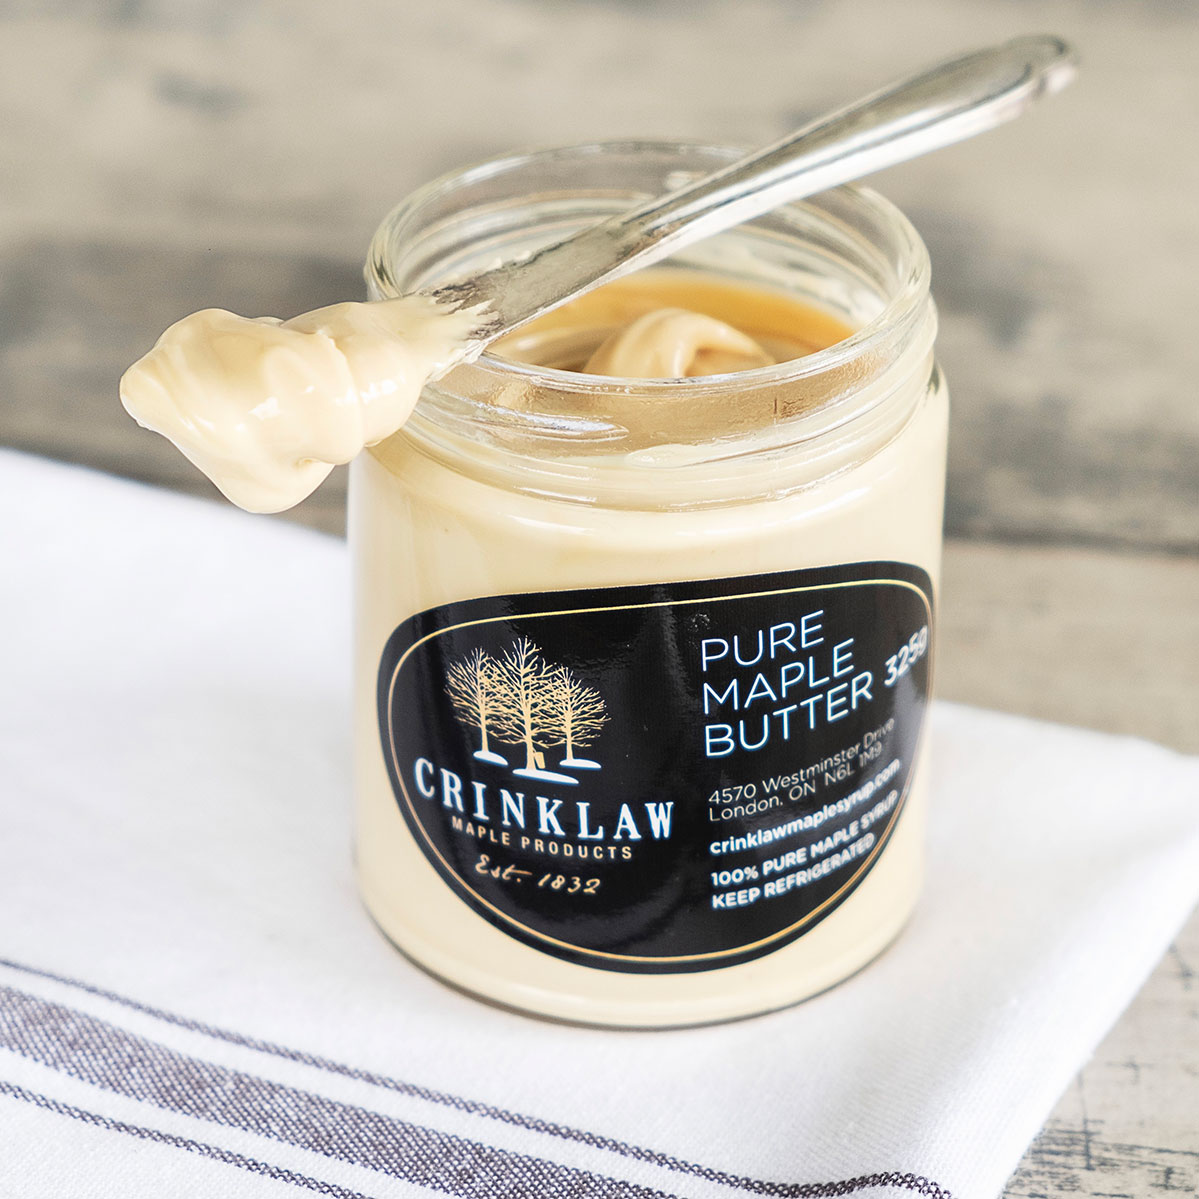 Crinklaws Pure Maple Butter